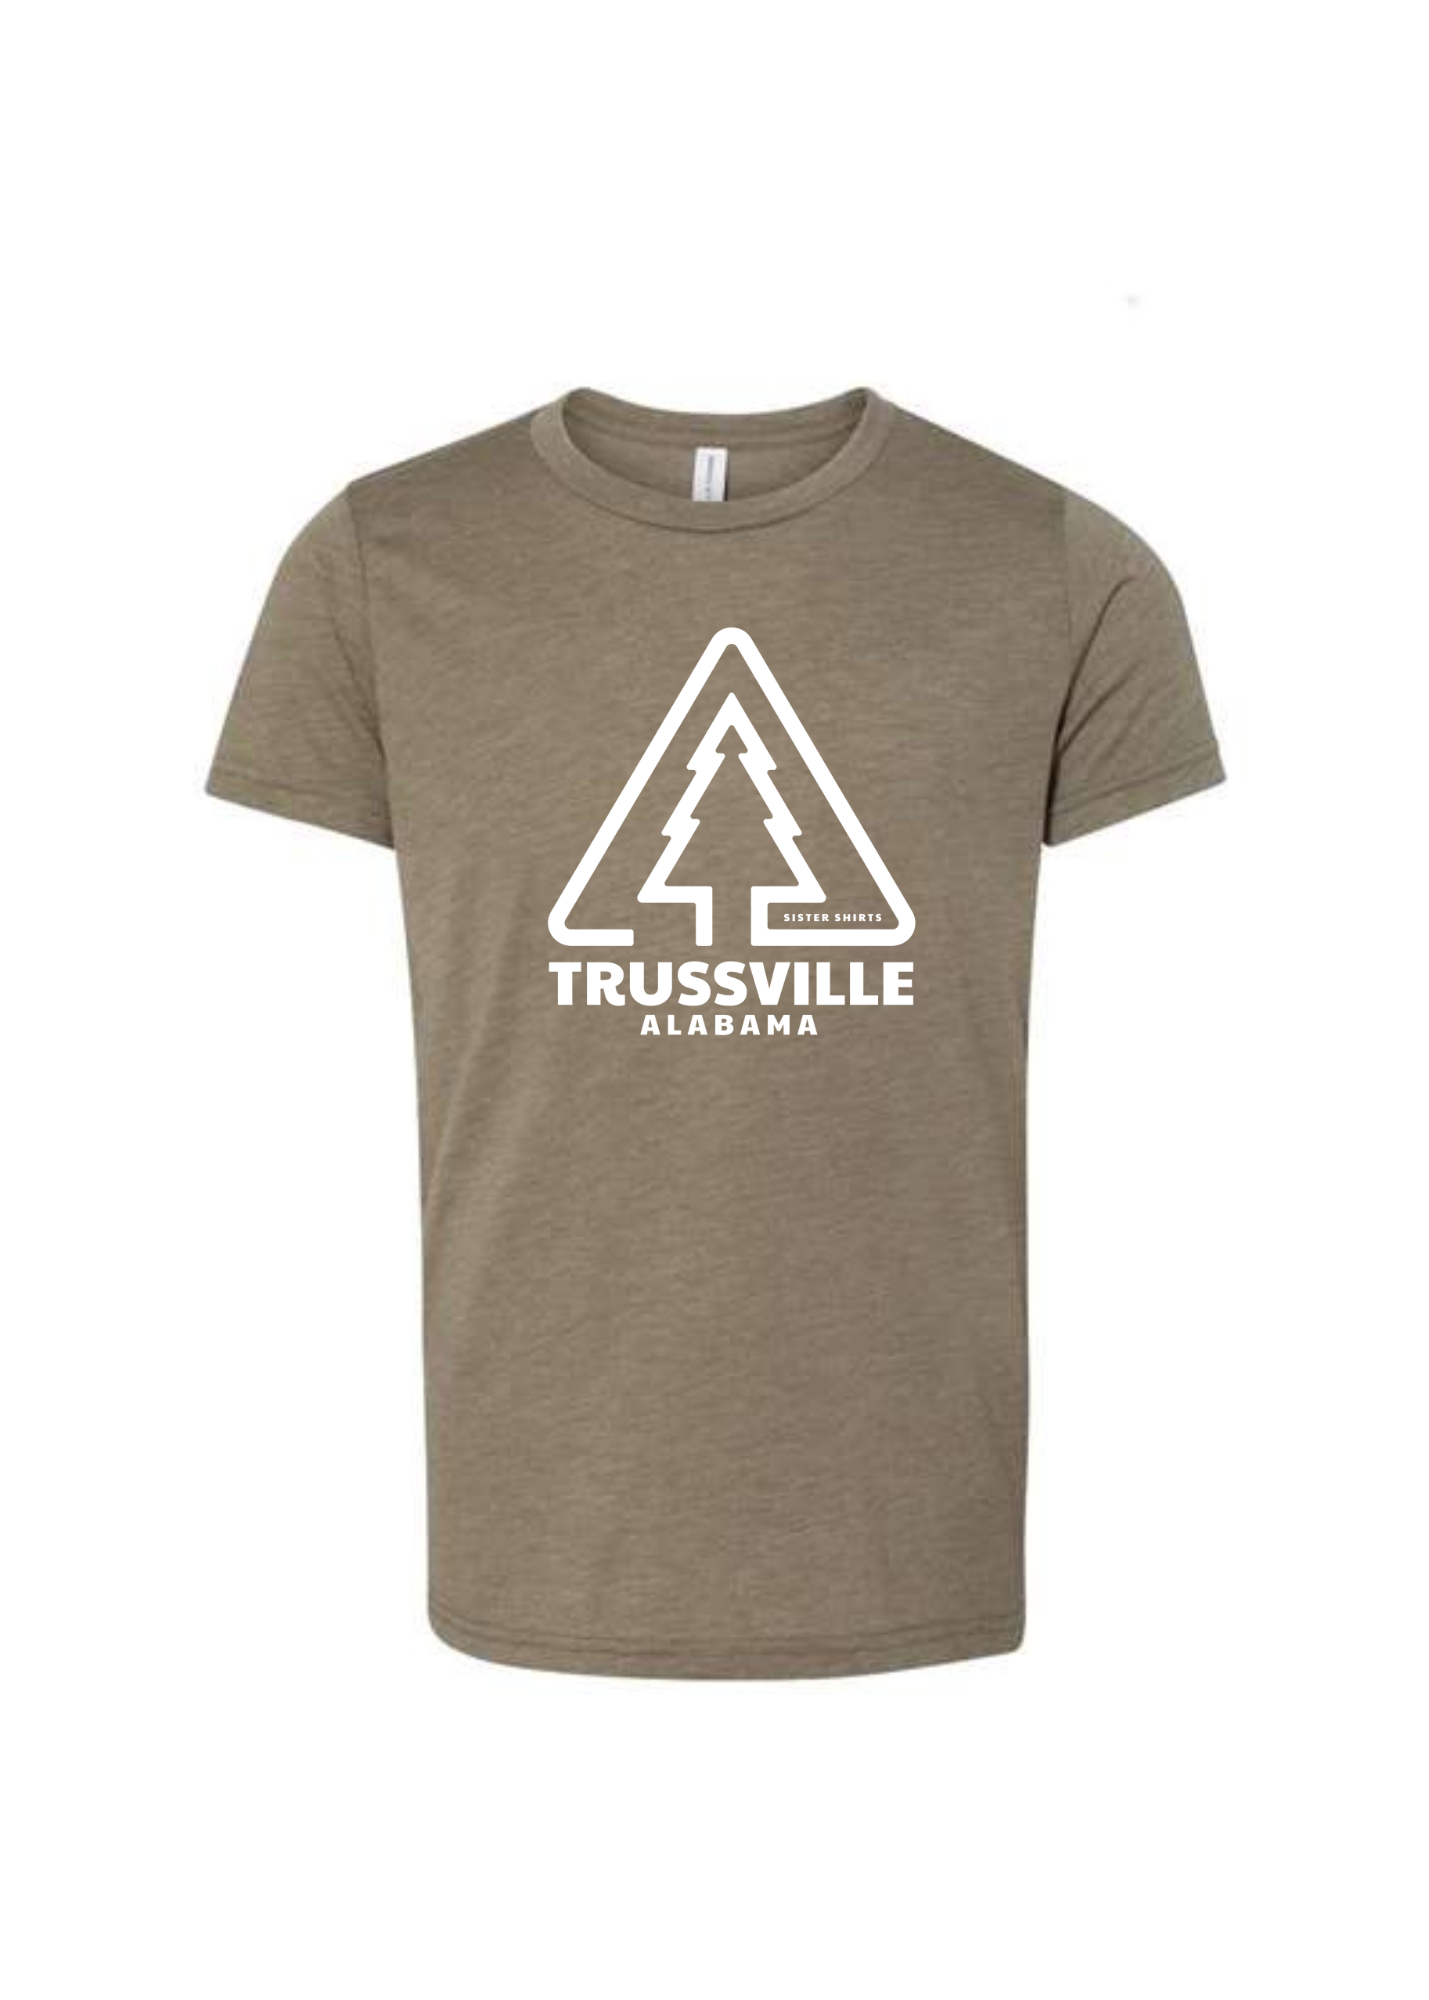 Evergreen Trussville | Kids Tee | RTS-Sister Shirts-Sister Shirts, Cute & Custom Tees for Mama & Littles in Trussville, Alabama.